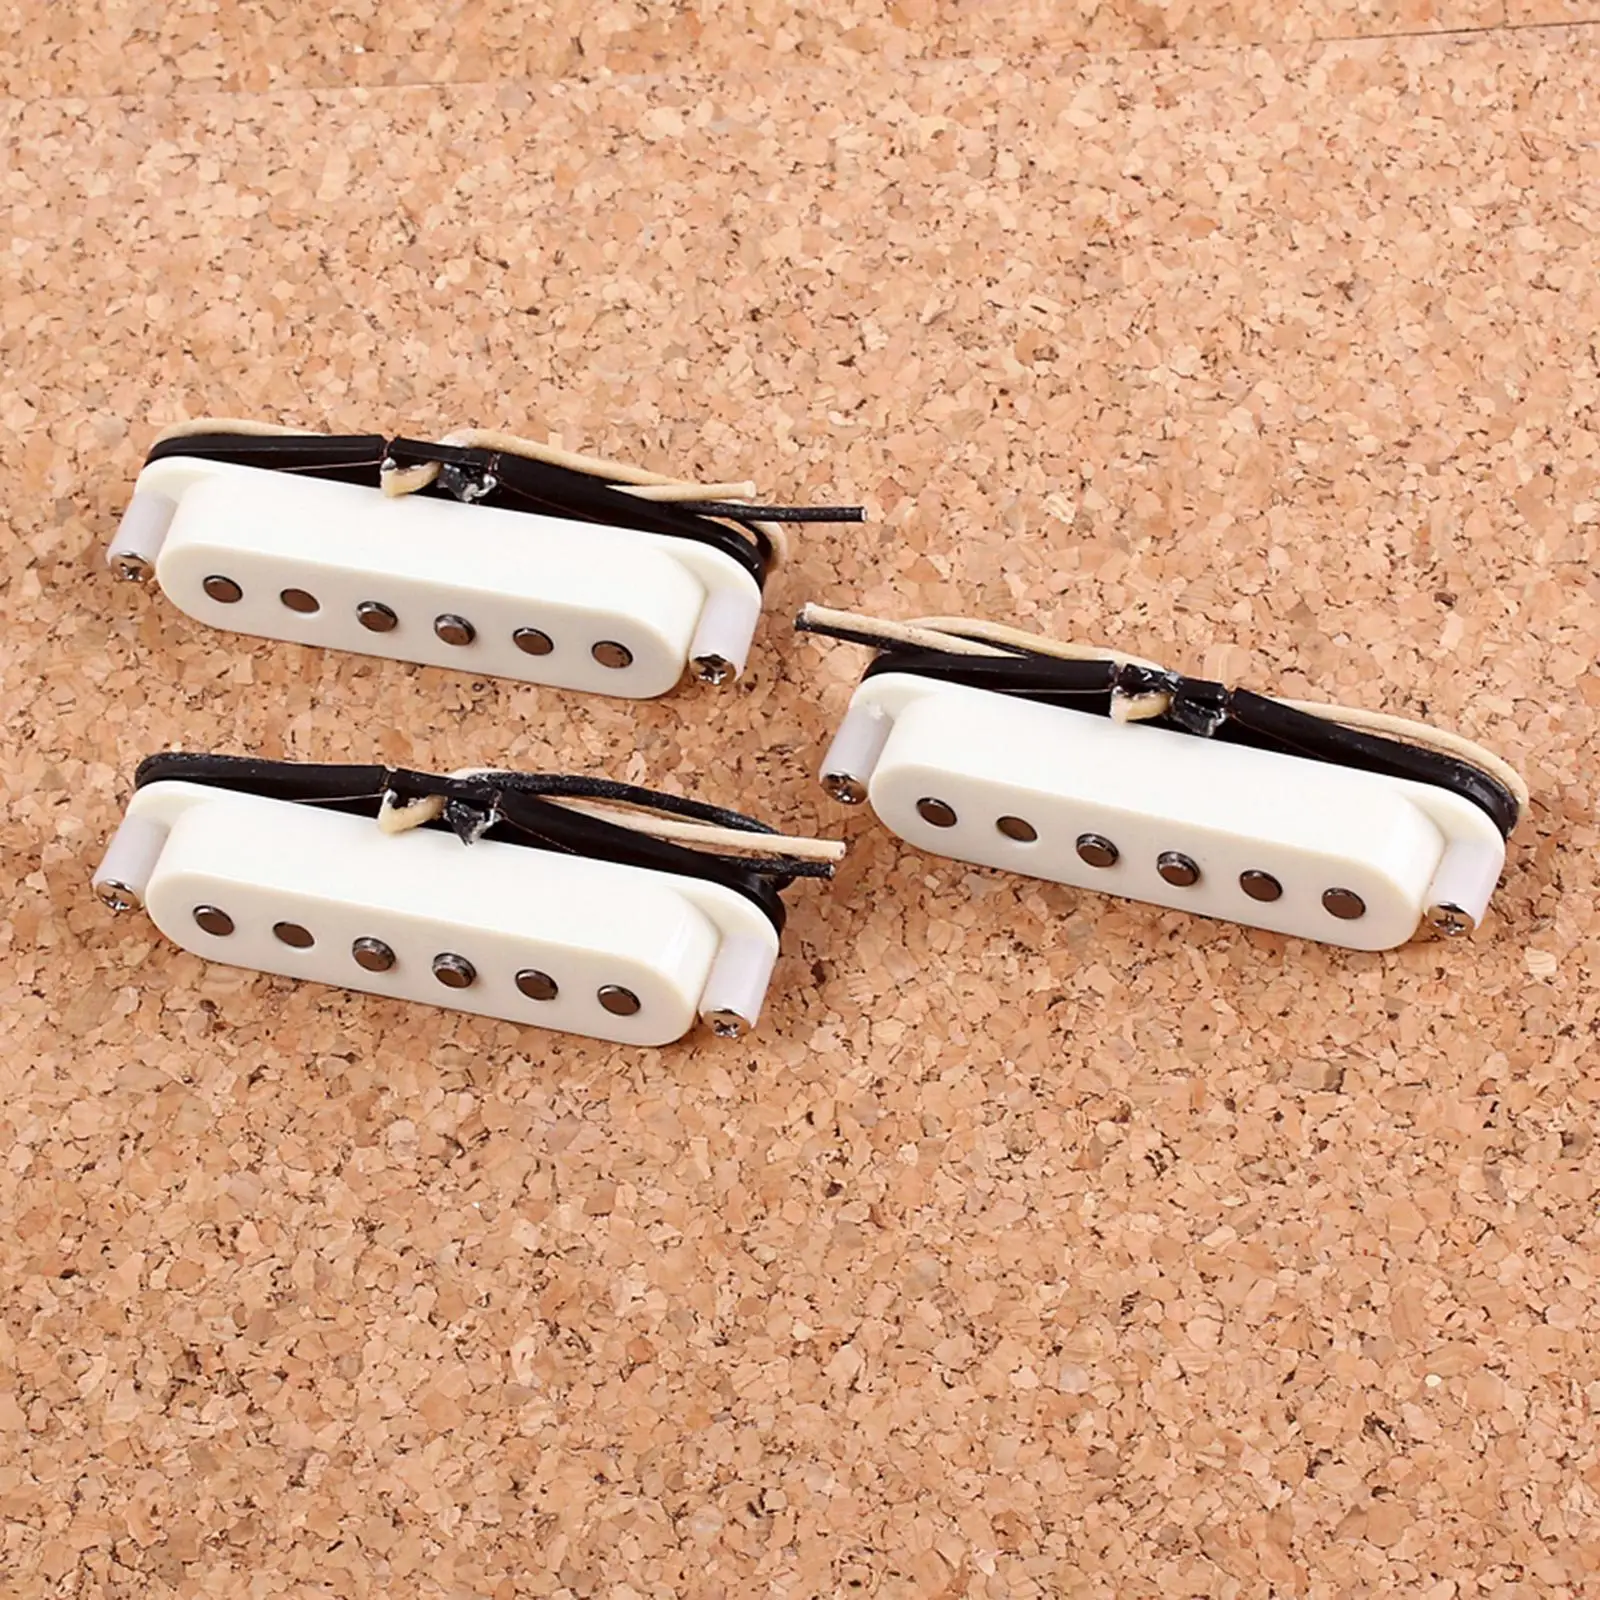 3 Pieces Silicone Guitar Pickup Set Guitar Replacement accessories including Neck Pickup, Middle and Bridge Pickup